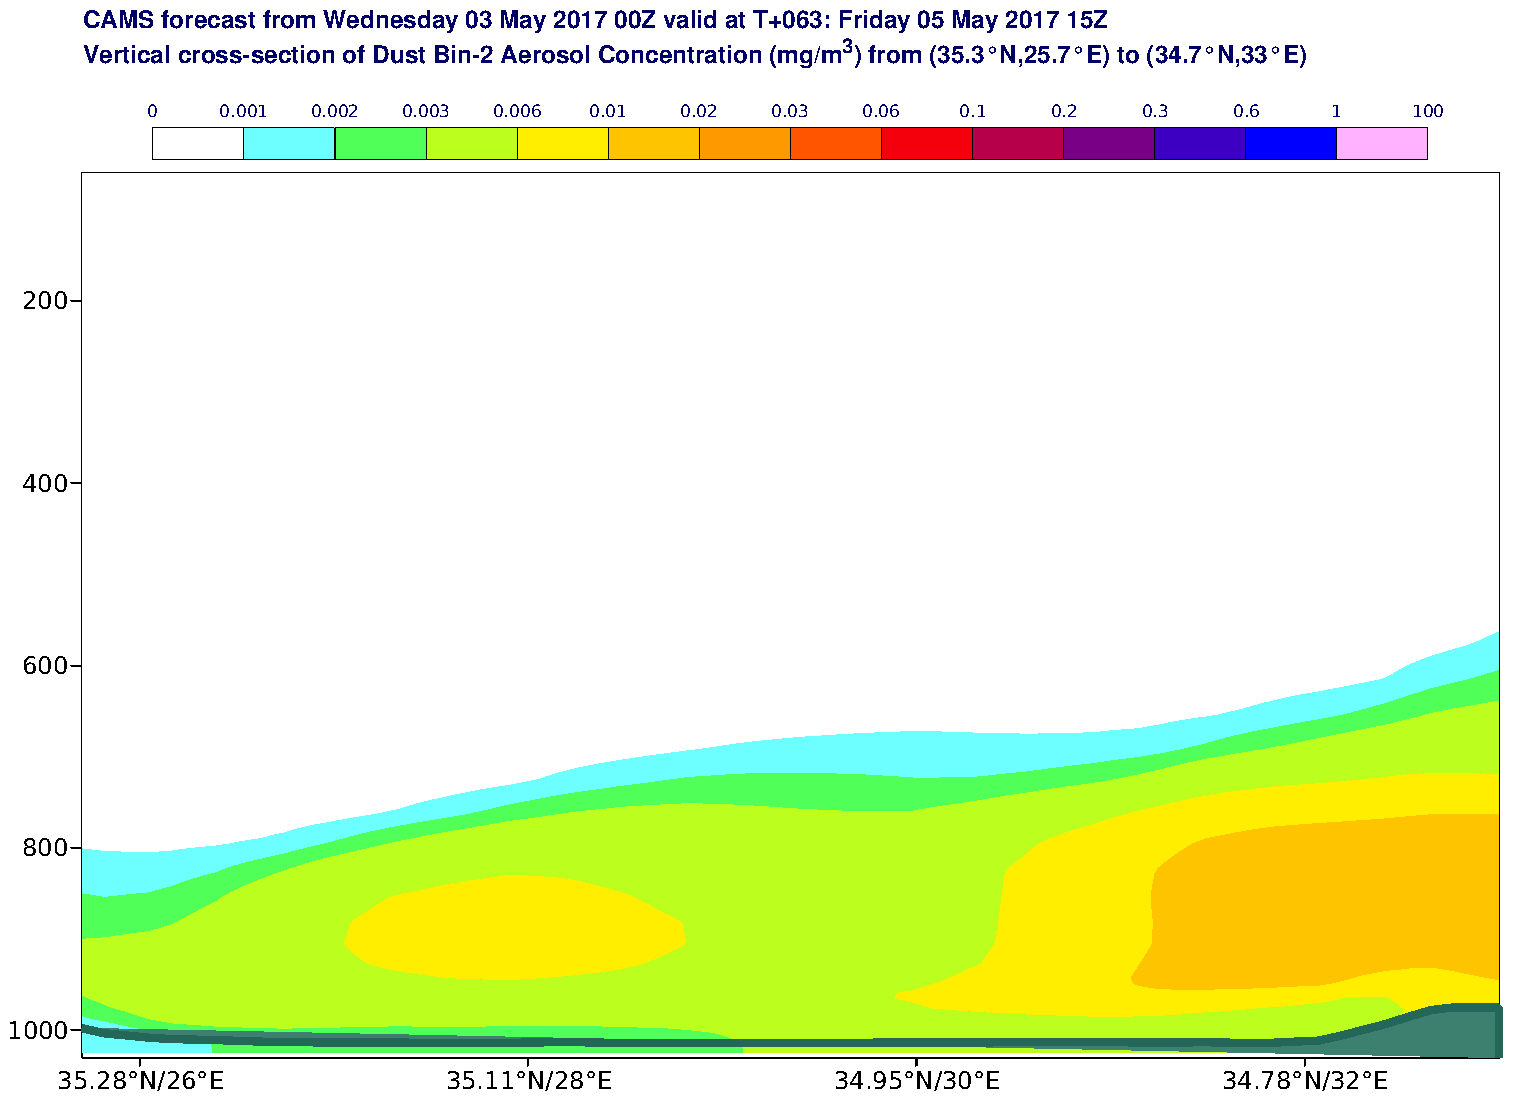 Vertical cross-section of Dust Bin-2 Aerosol Concentration (mg/m3) valid at T63 - 2017-05-05 15:00